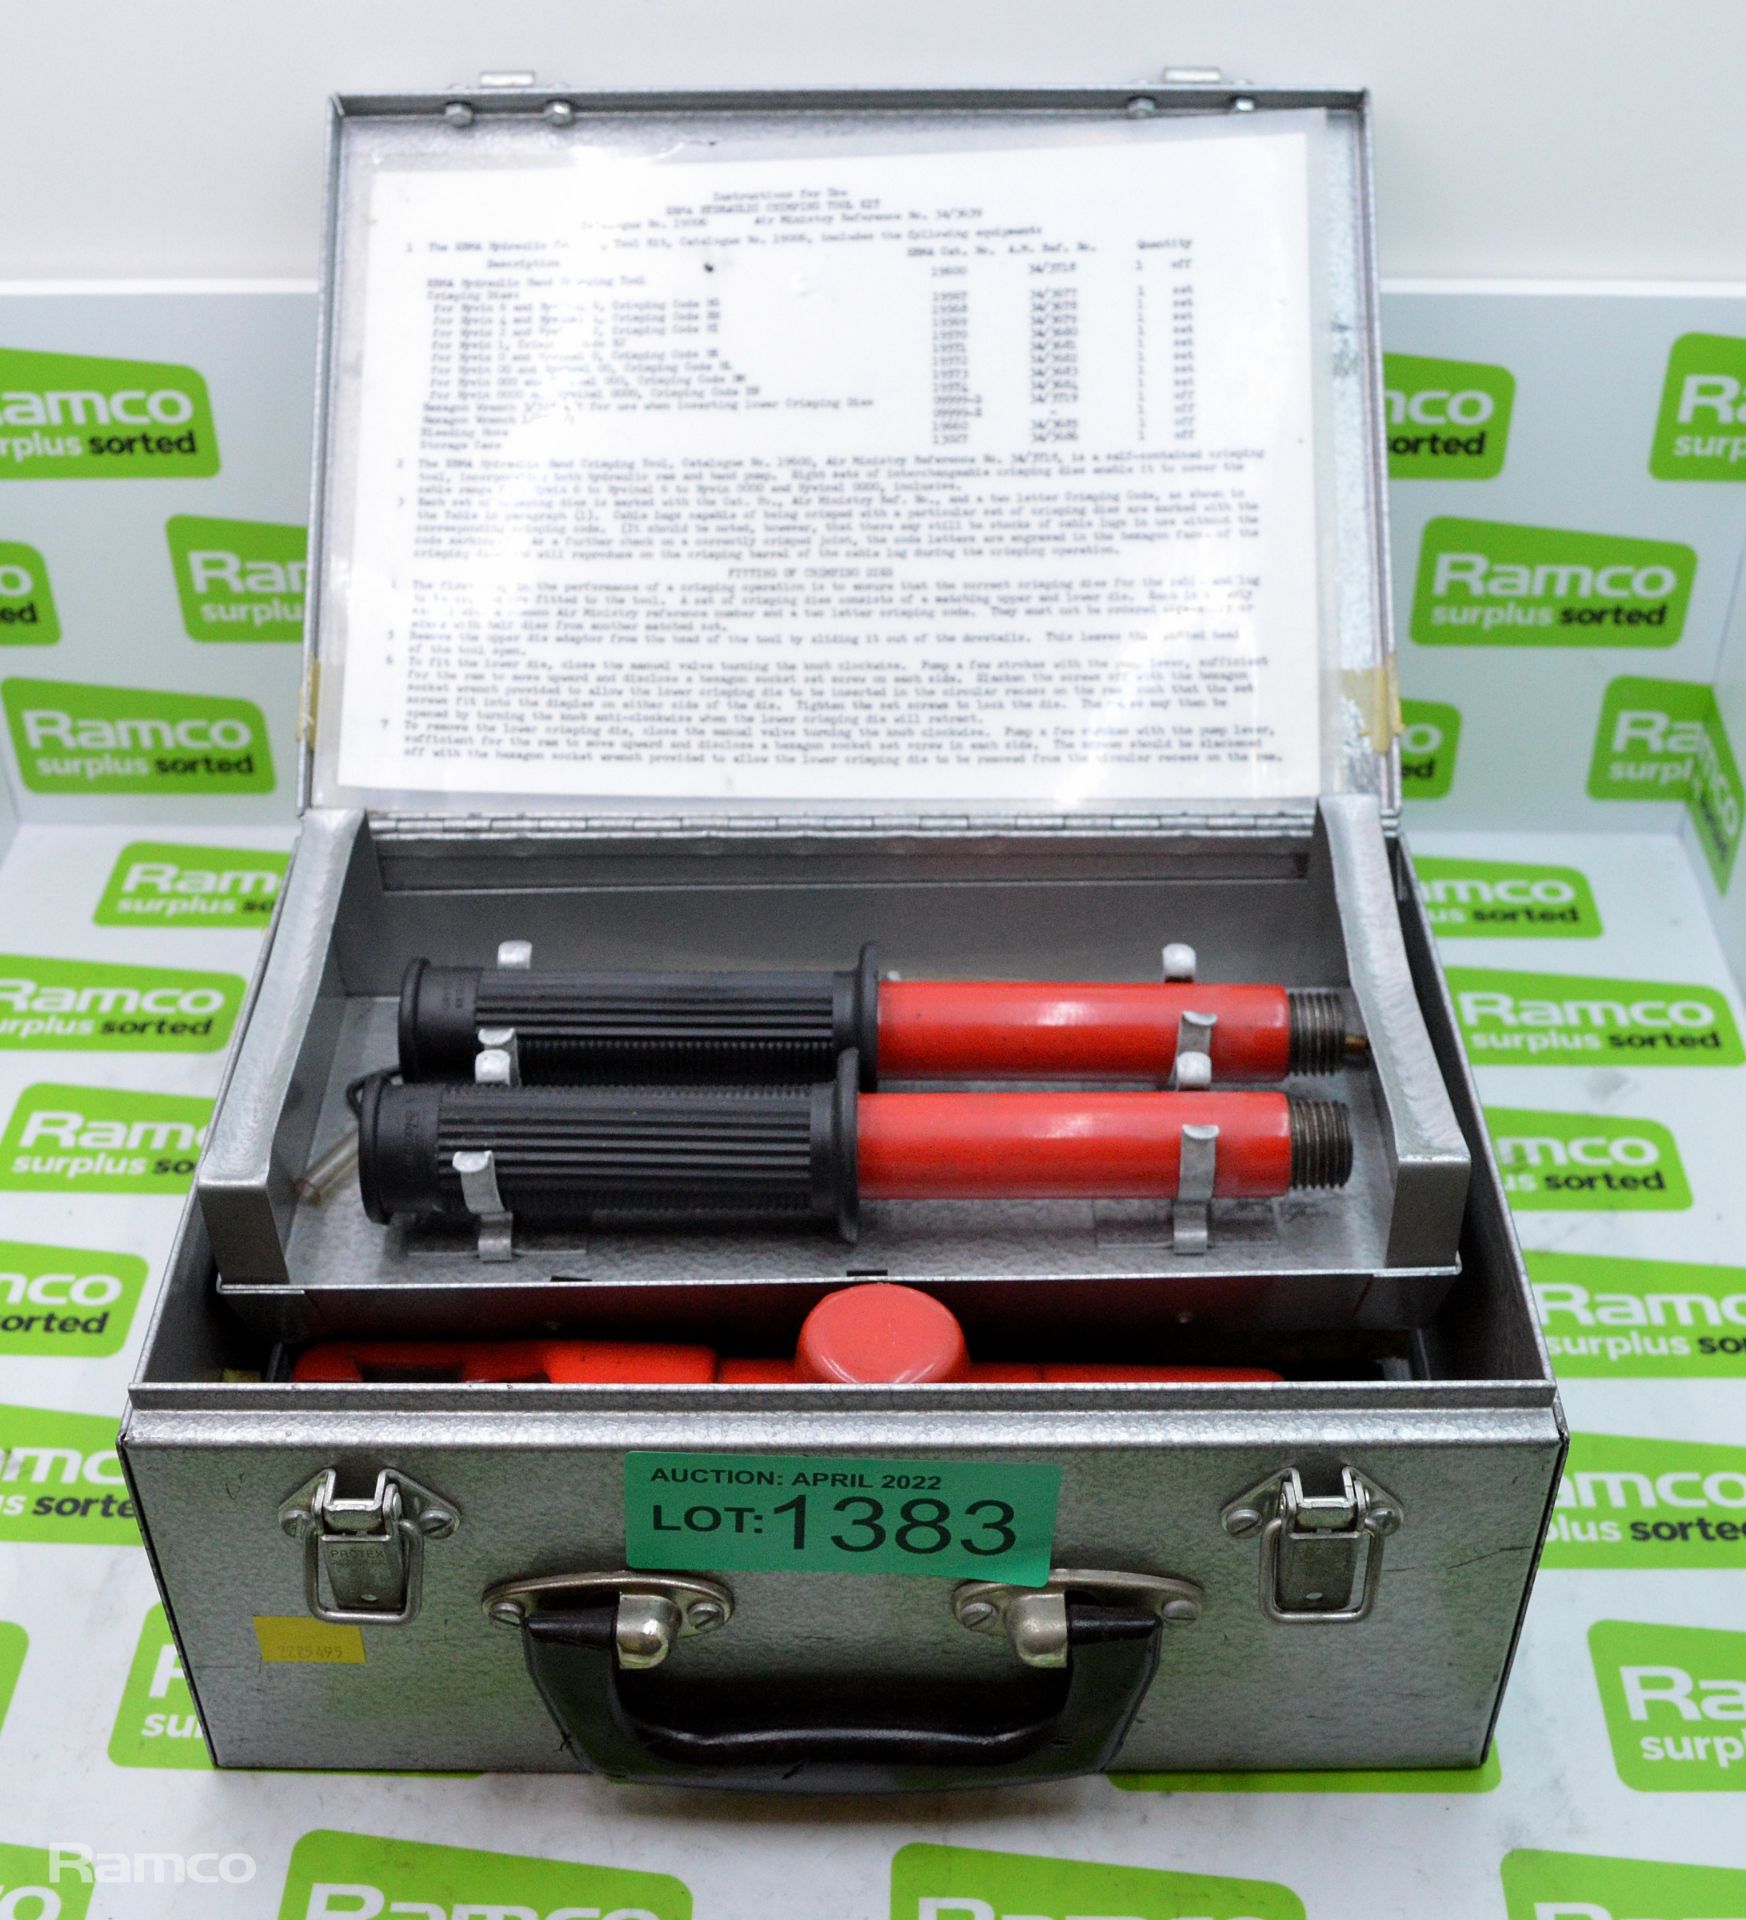 Erma Limited Hydraulic Crimping Tool